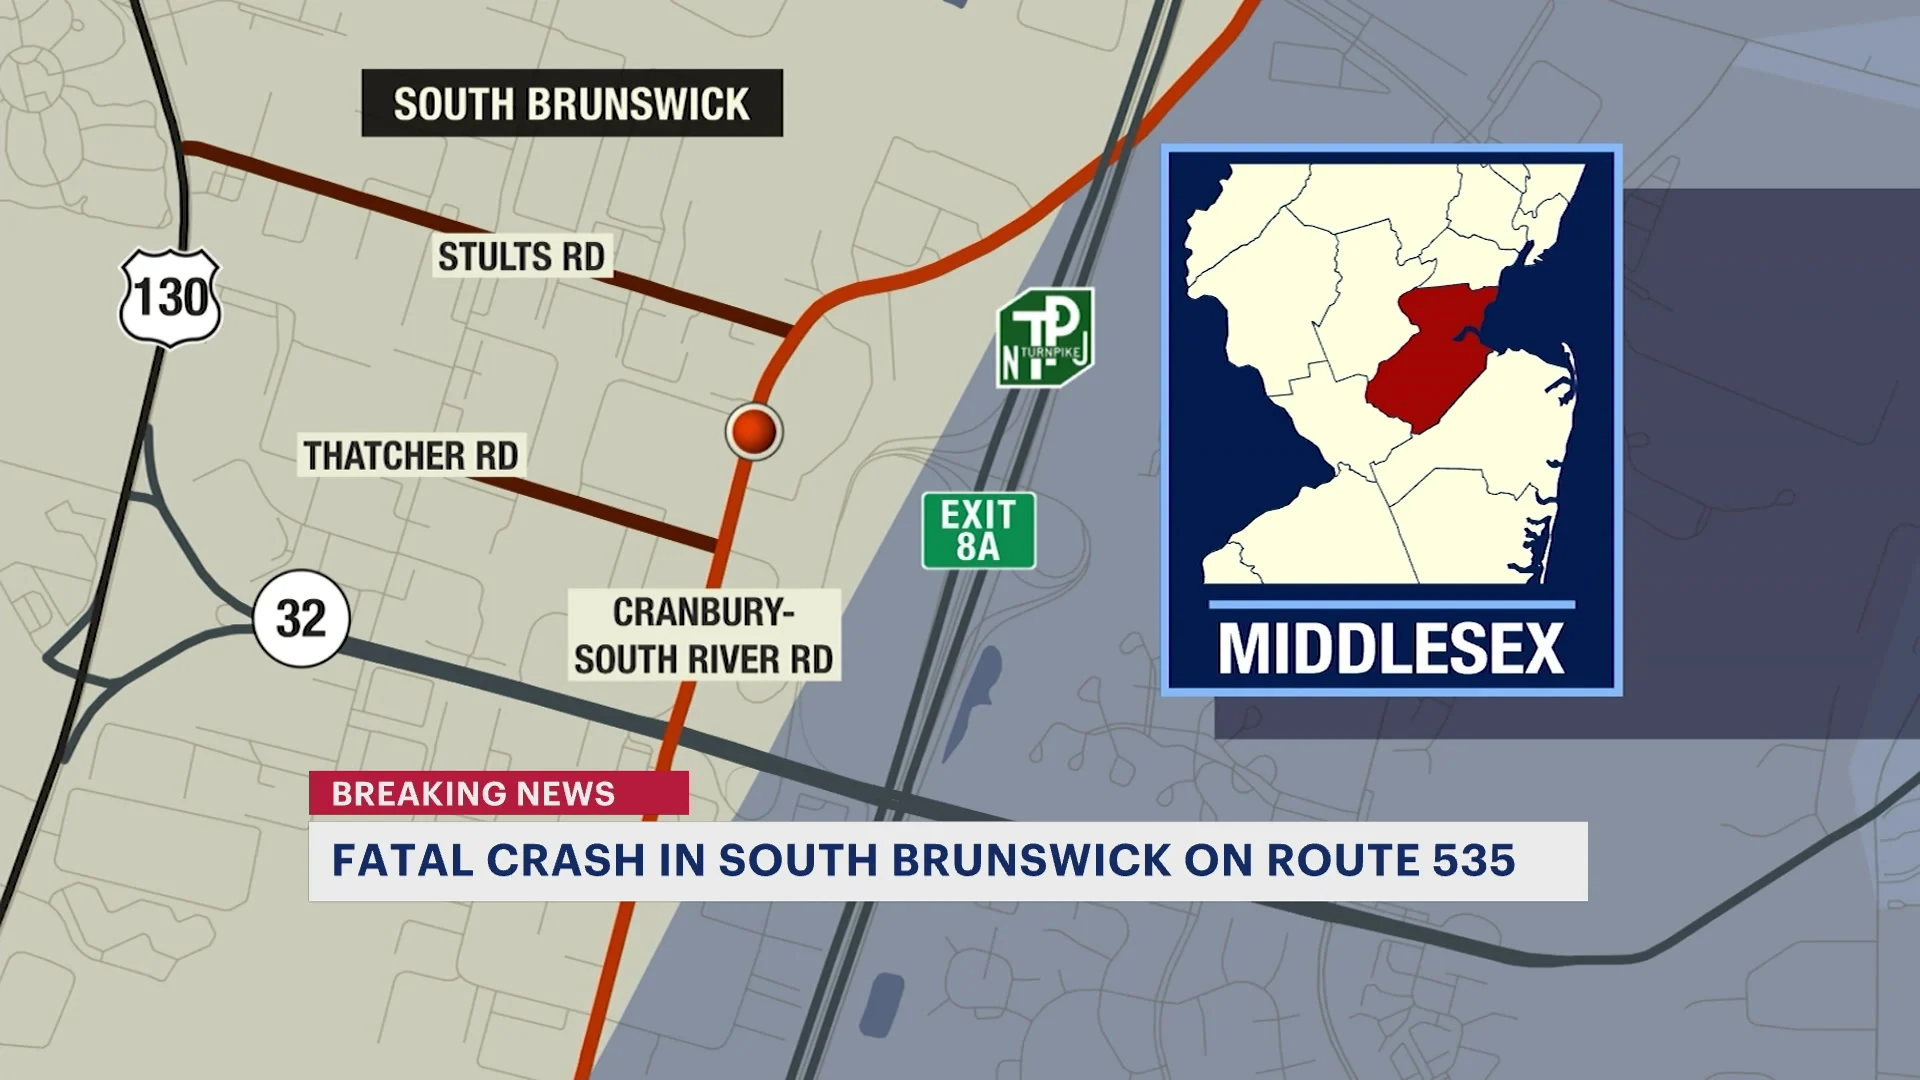 Police: 1 person killed in car crash on Route 535 in South Brunswick